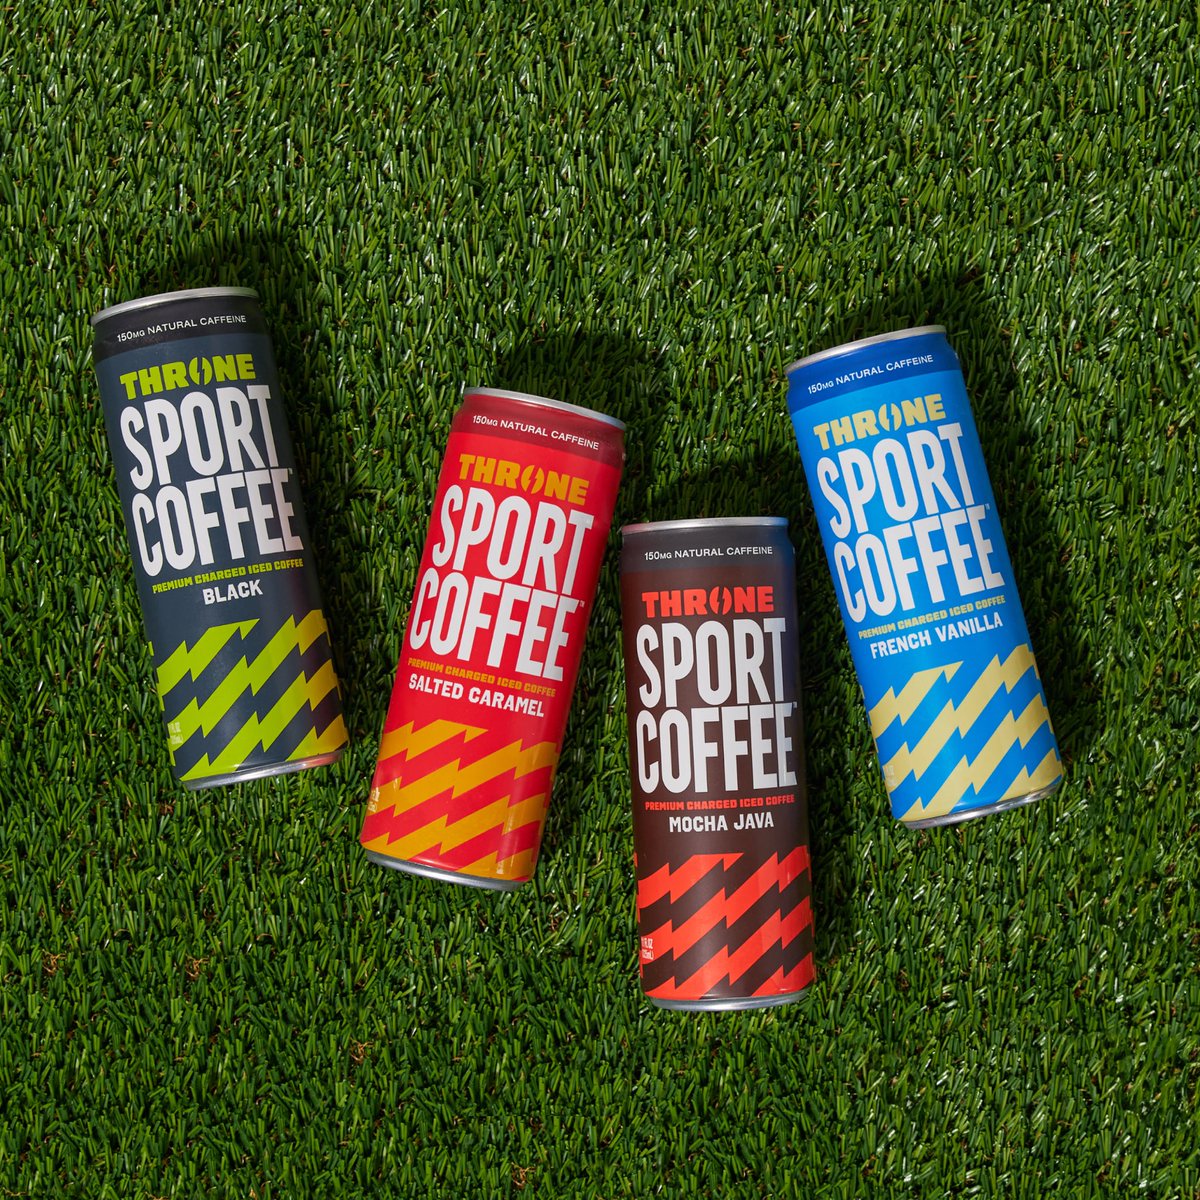 I am proud to announce the launch of @gosportcoffee – my new ready to drink iced coffee. From practice and meetings to travel and family time, coffee has always kept me going. As lead investor and true believer in Throne SPORT COFFEE, we’re excited to share a better for you